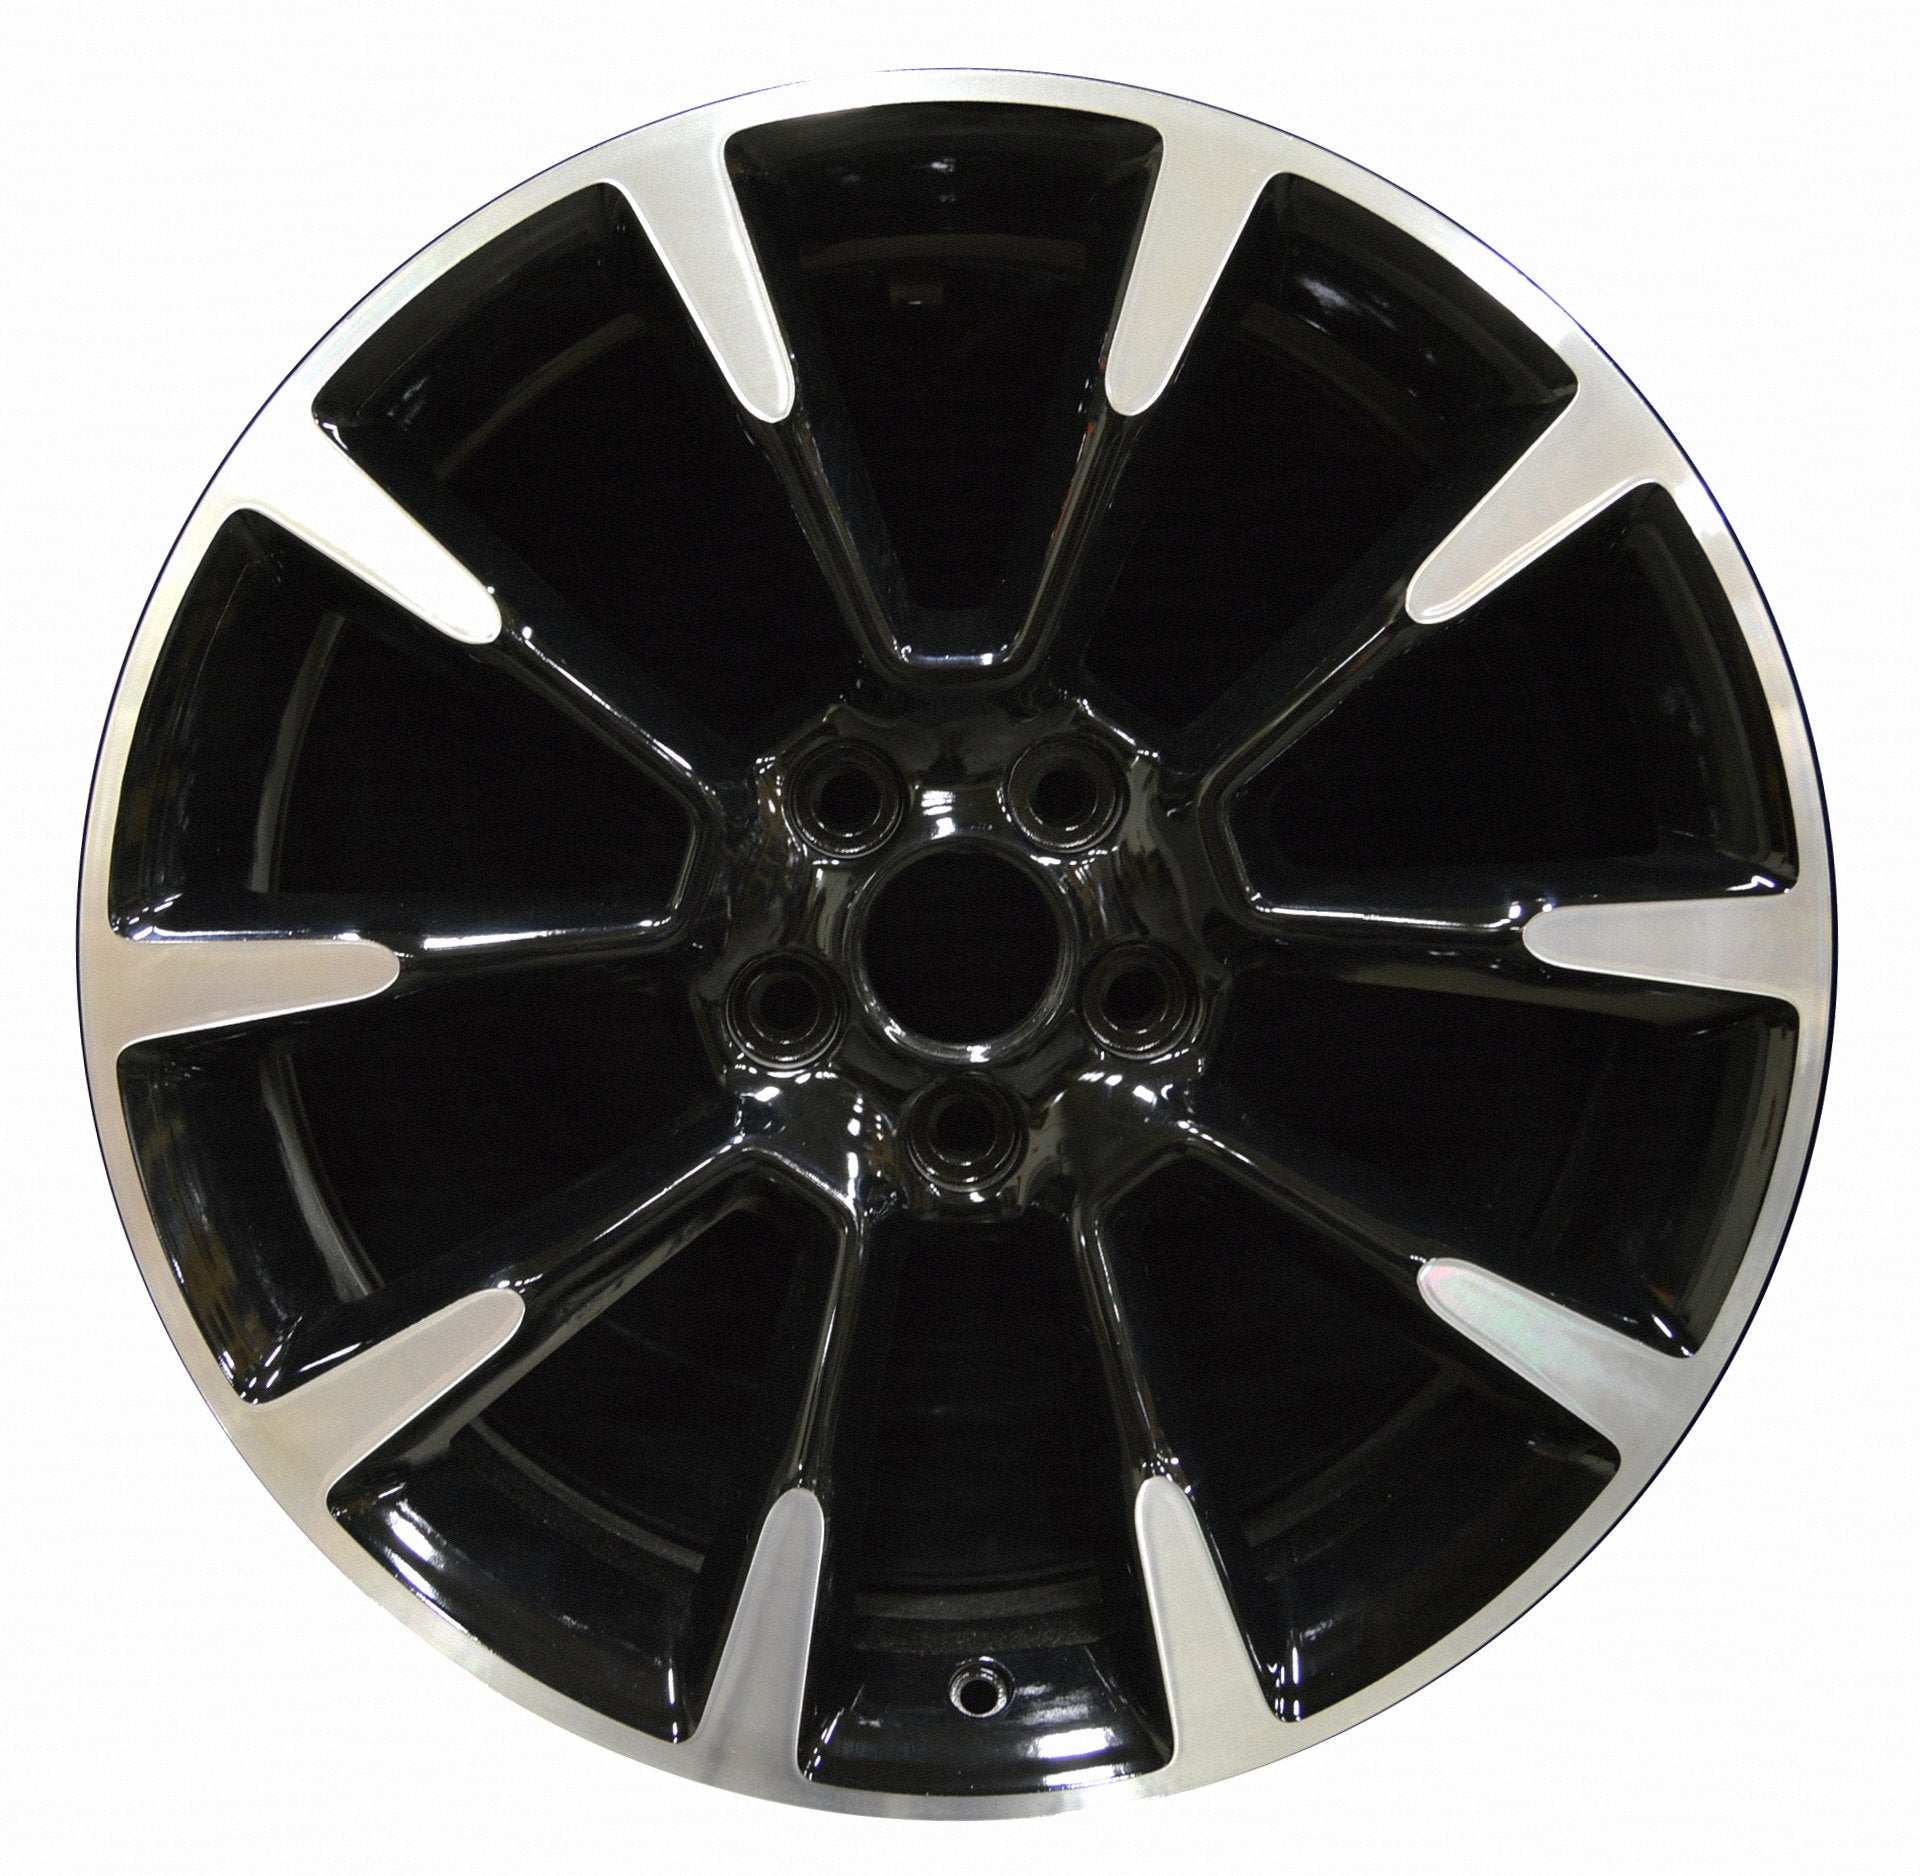 Ford Mustang  2011, 2012 Factory OEM Car Wheel Size 19x8.5 Alloy WAO.3863B.PB01.MA